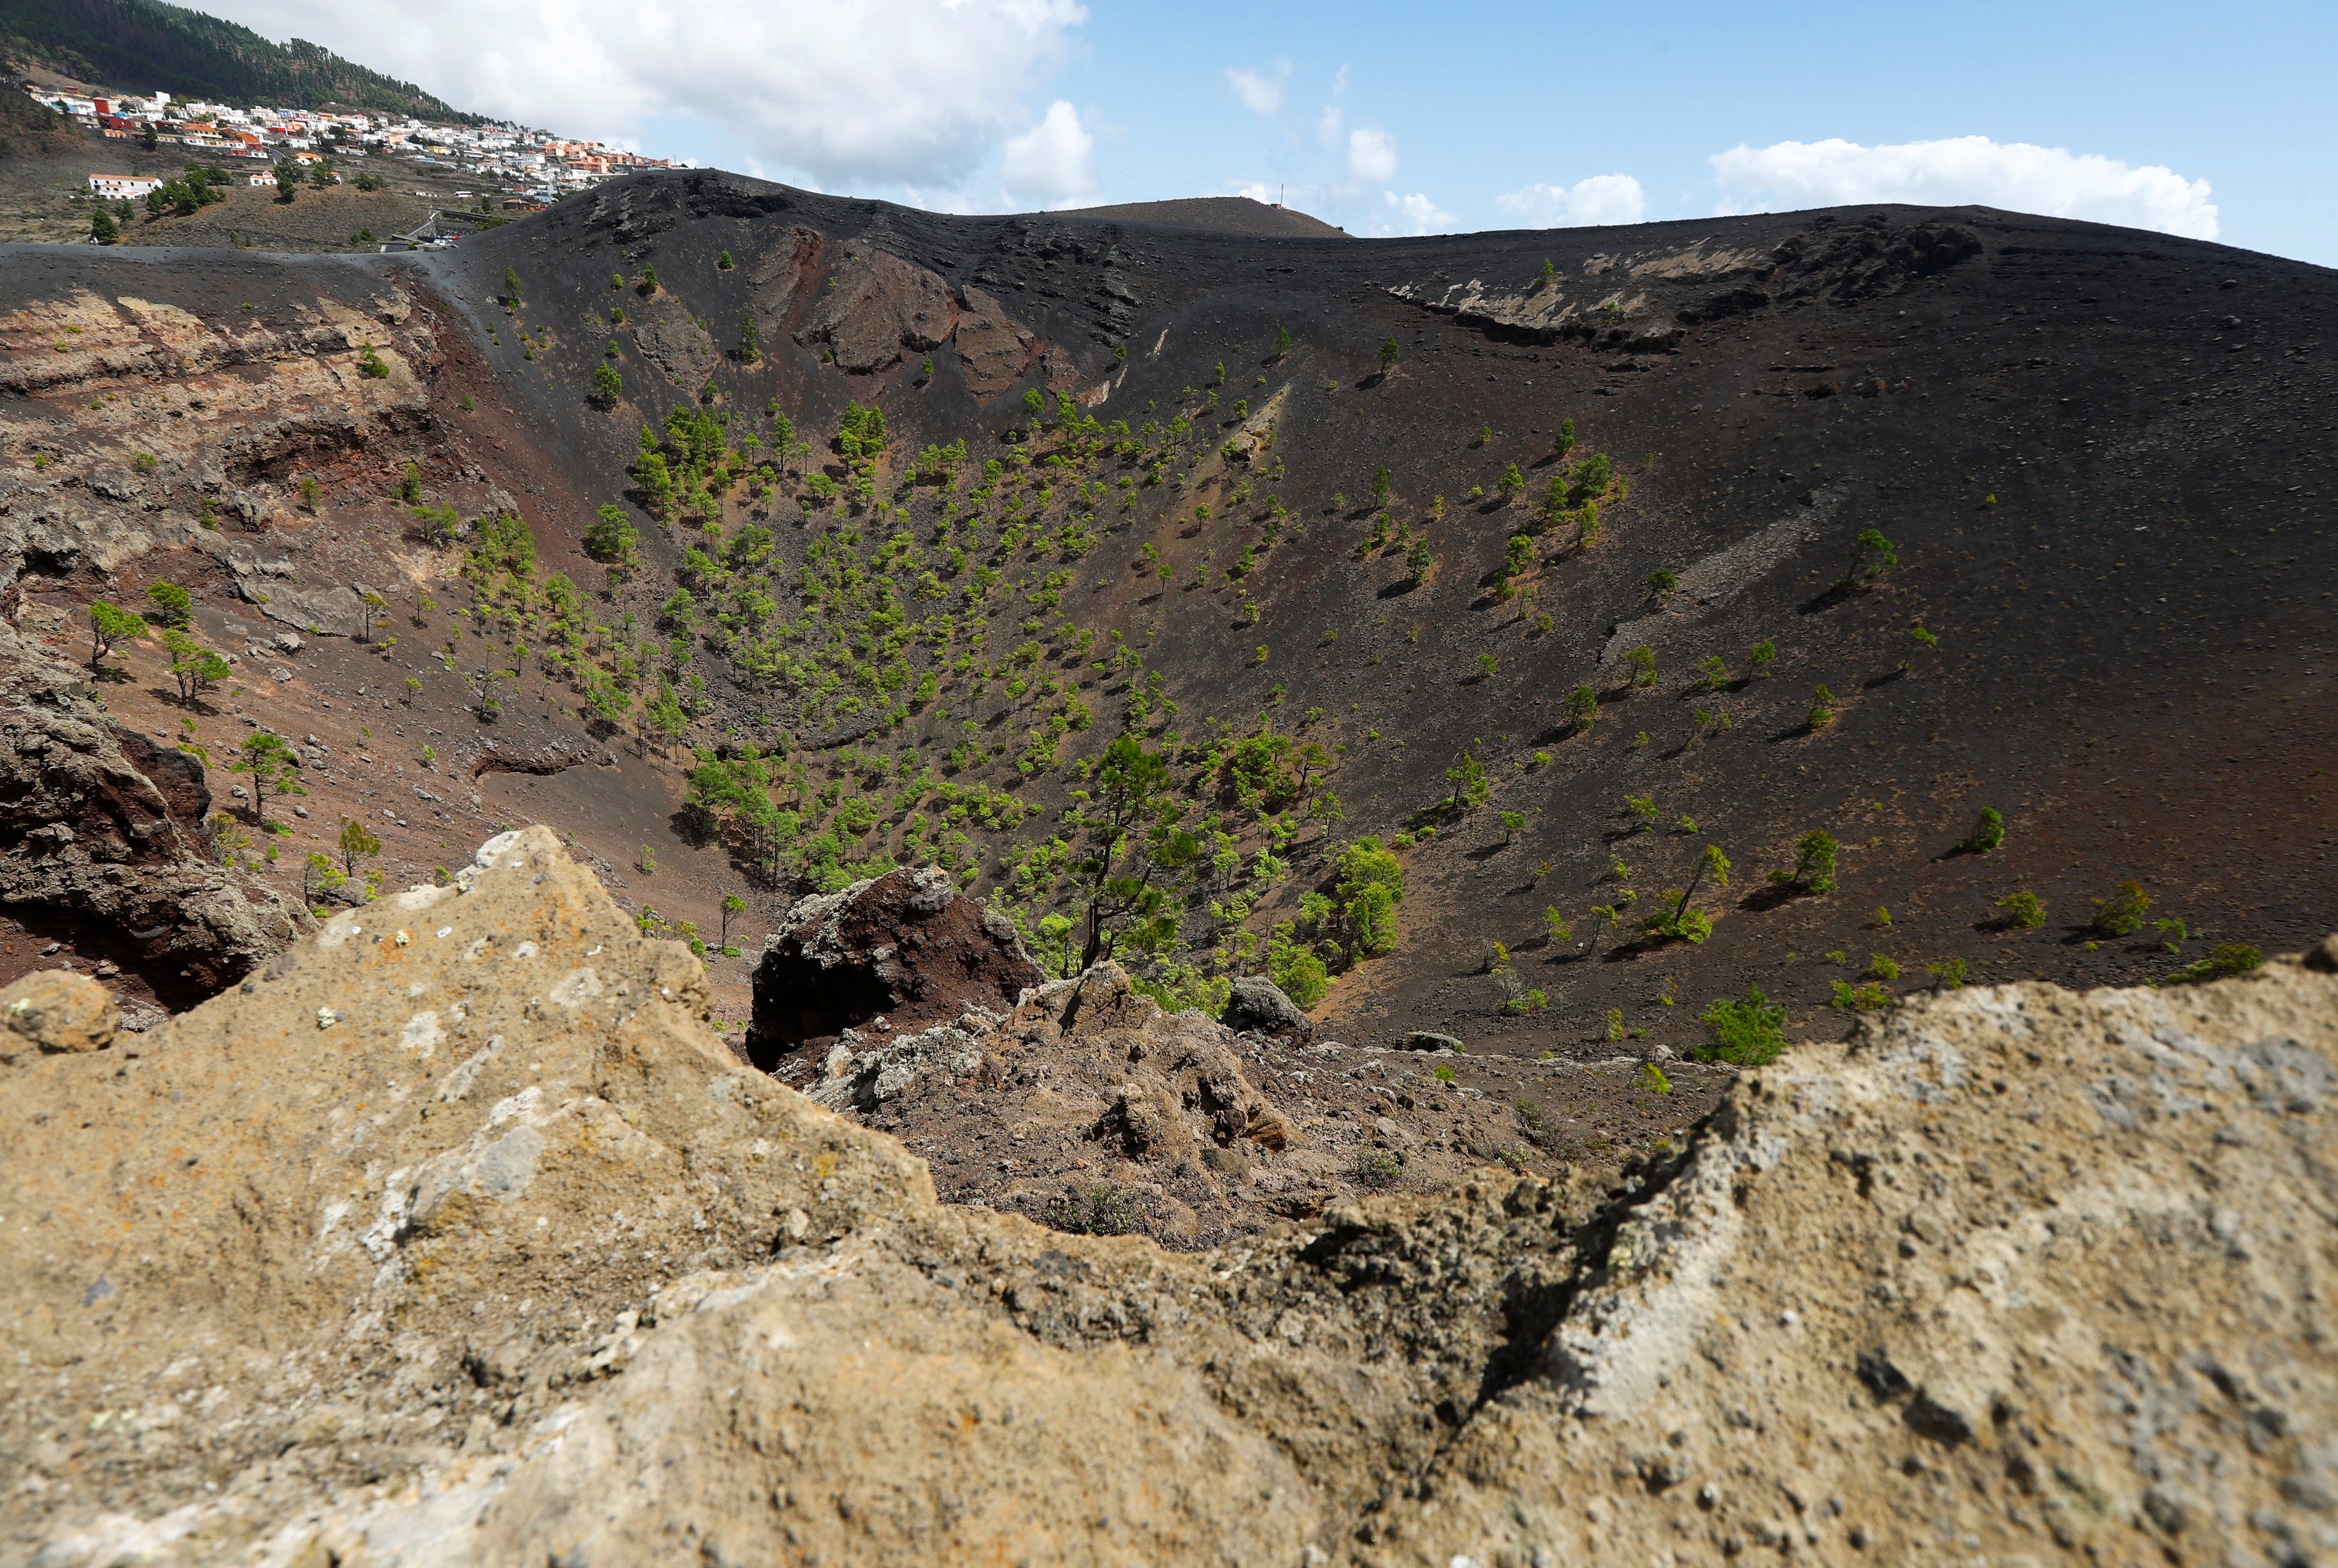 A general view of the crater of the San Antonio Volcano on the Canary Island of La Palma